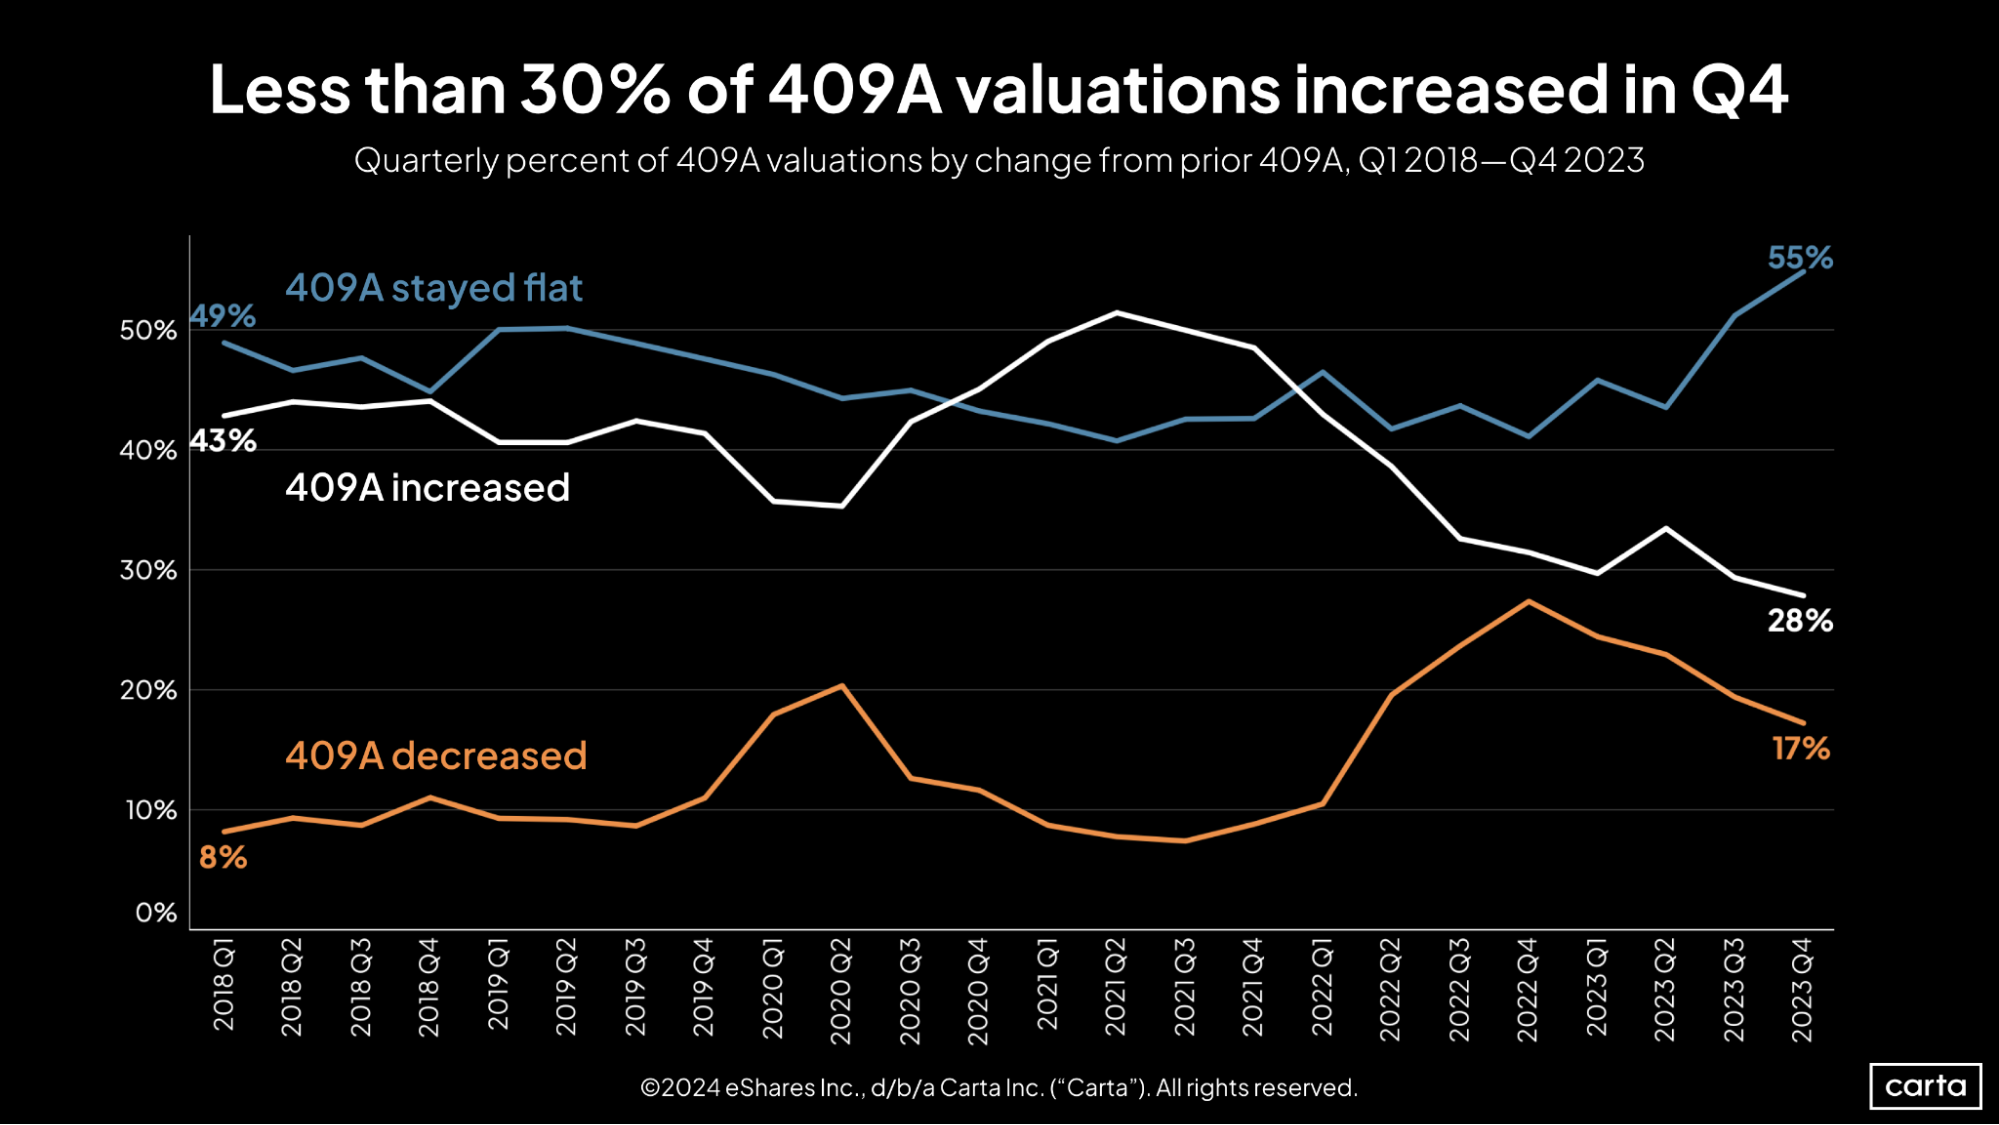 Carta SOPM Q4 2023 Less than 30 percent of 409A valuations increased in Q4